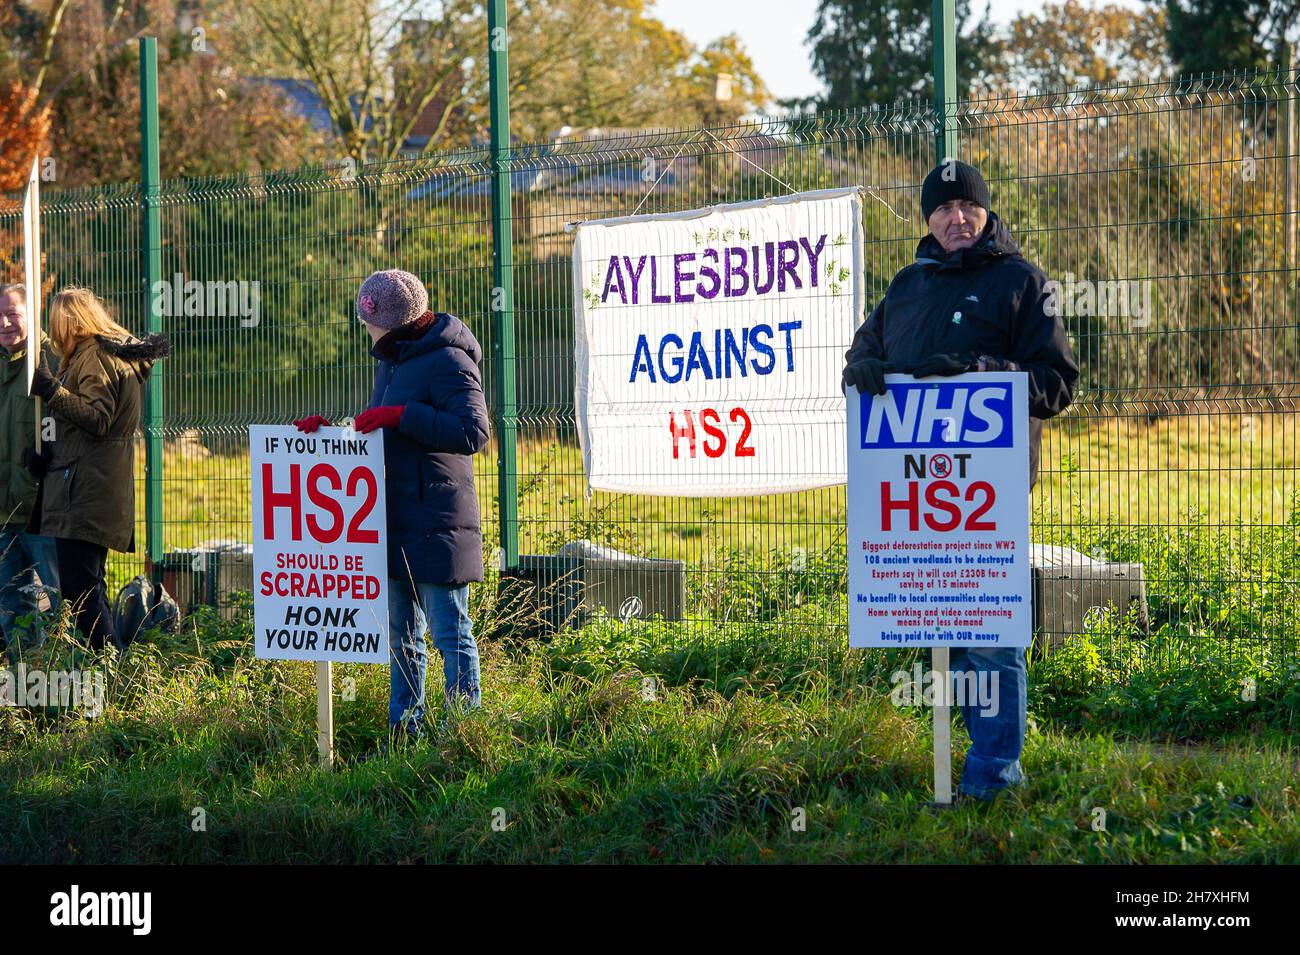 Aylesbury, Buckinghamshire, UK. 25th November, 2021. Anti HS2 protesters were protesting along the Oxford Road today in Aylesbury about HS2 allegedly committing wildlife crimes as HS2 have felled mature trees that they believe had hibernating bats roosting in them. Although the Eastern Leg of the HS2 High Speed Rail has been cancelled by Boris Johnson, HS2 Ltd are continuing with their construction of Phase 1 of the HS2 High Speed Rail from London to Birmingham which is destroying swathes of the Chilterns, an Area of Outstanding Natural Beauty. Credit: Maureen McLean/Alamy Live News Stock Photo